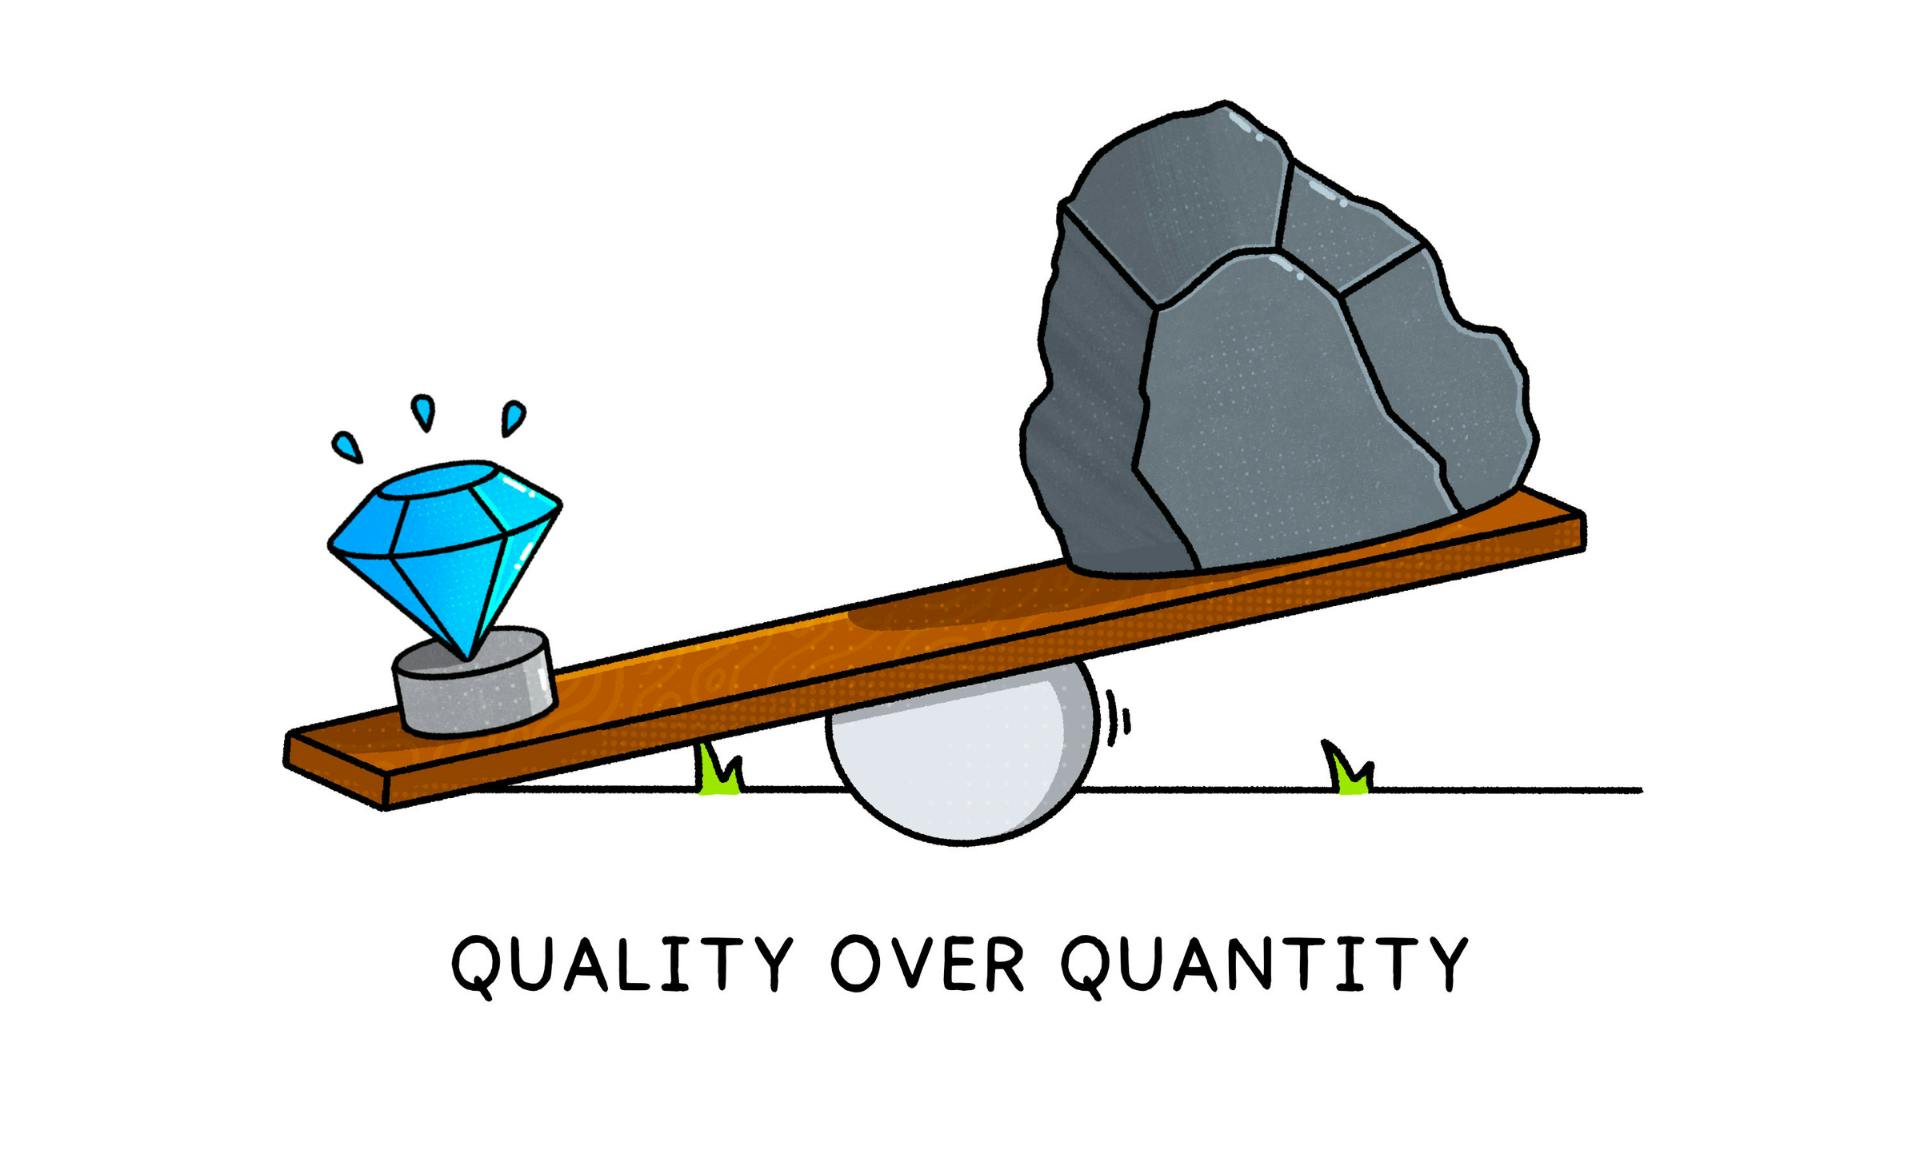 Quality over quantity, with illustration